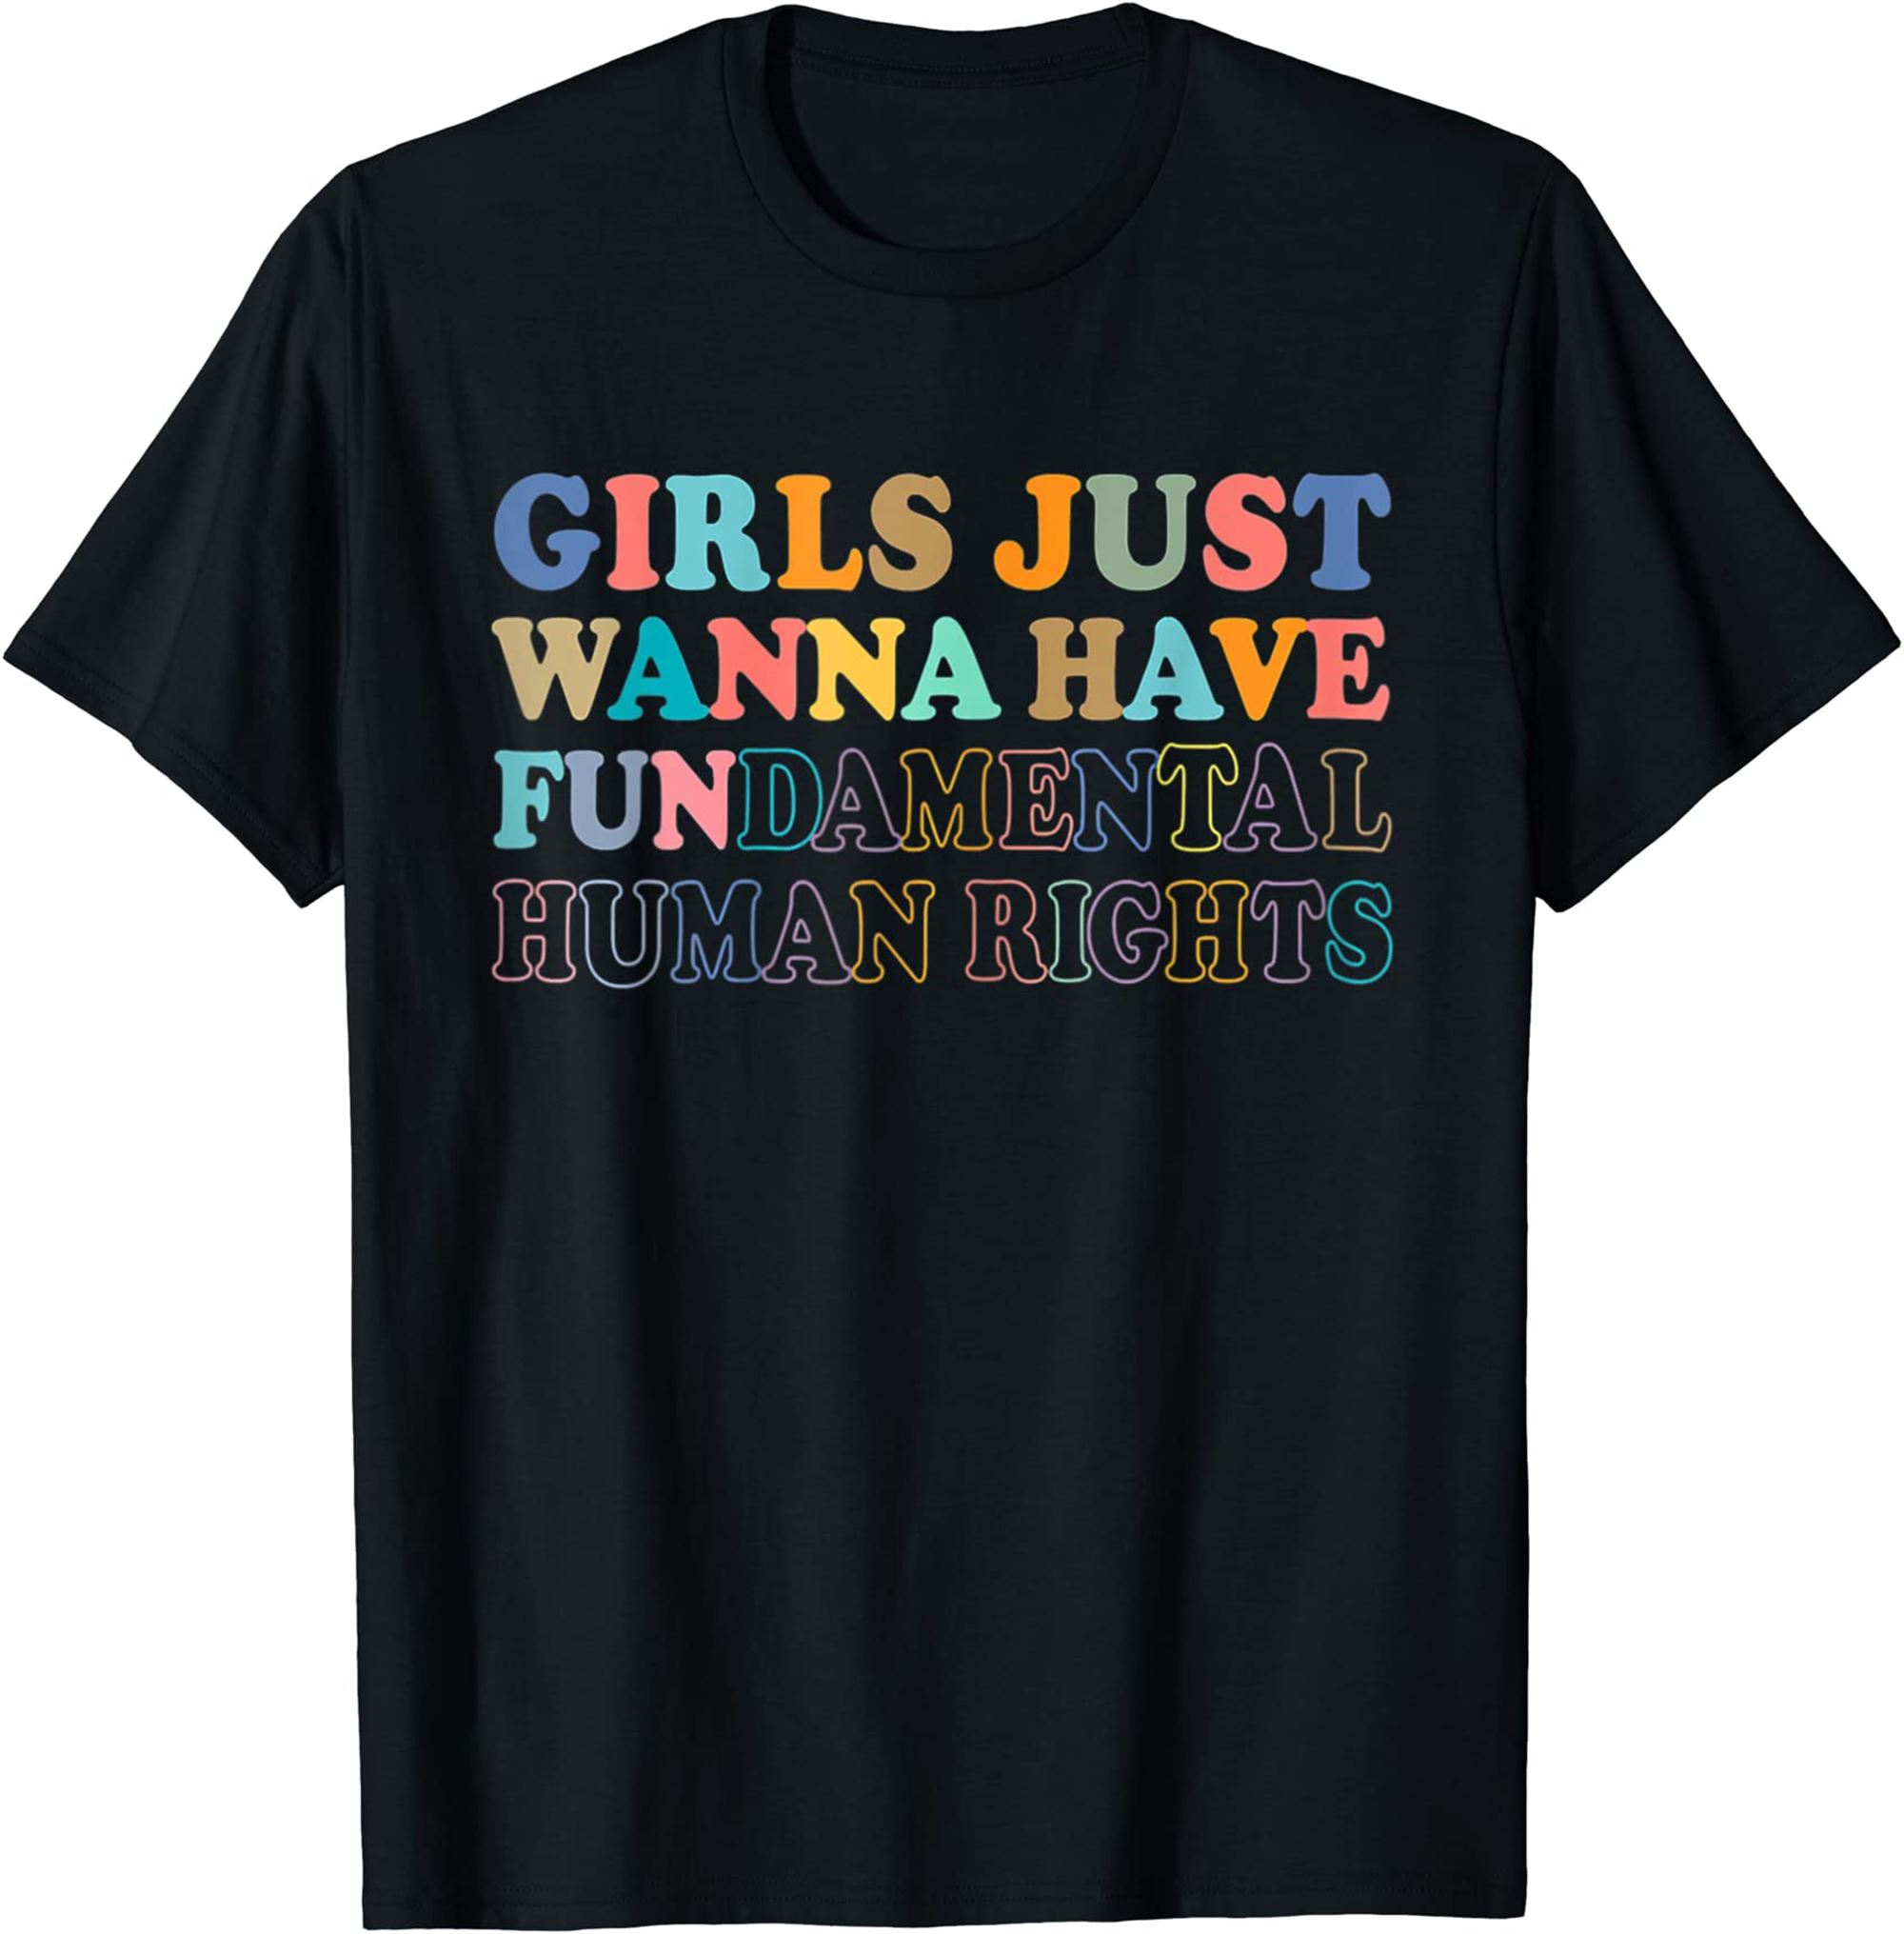 Girls Just Wanna Have Fundamental Human Rights T-shirt Full Size Up To 5xl